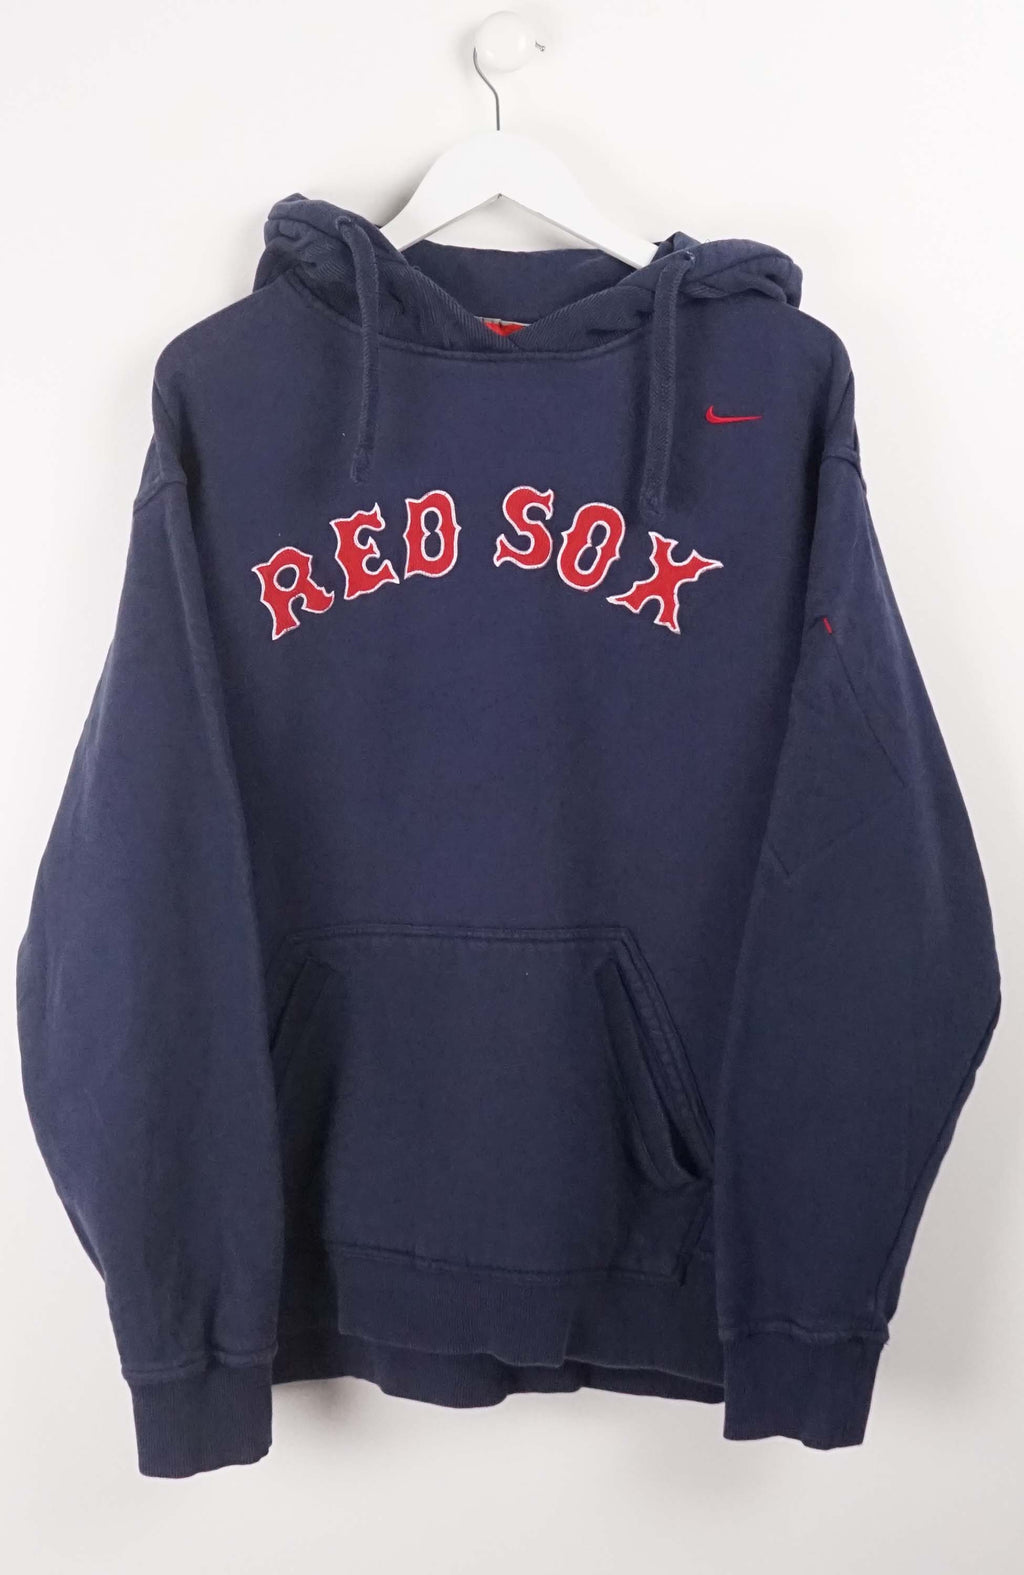 VINTAGE NIKE RED SOX SWEATER (XL)